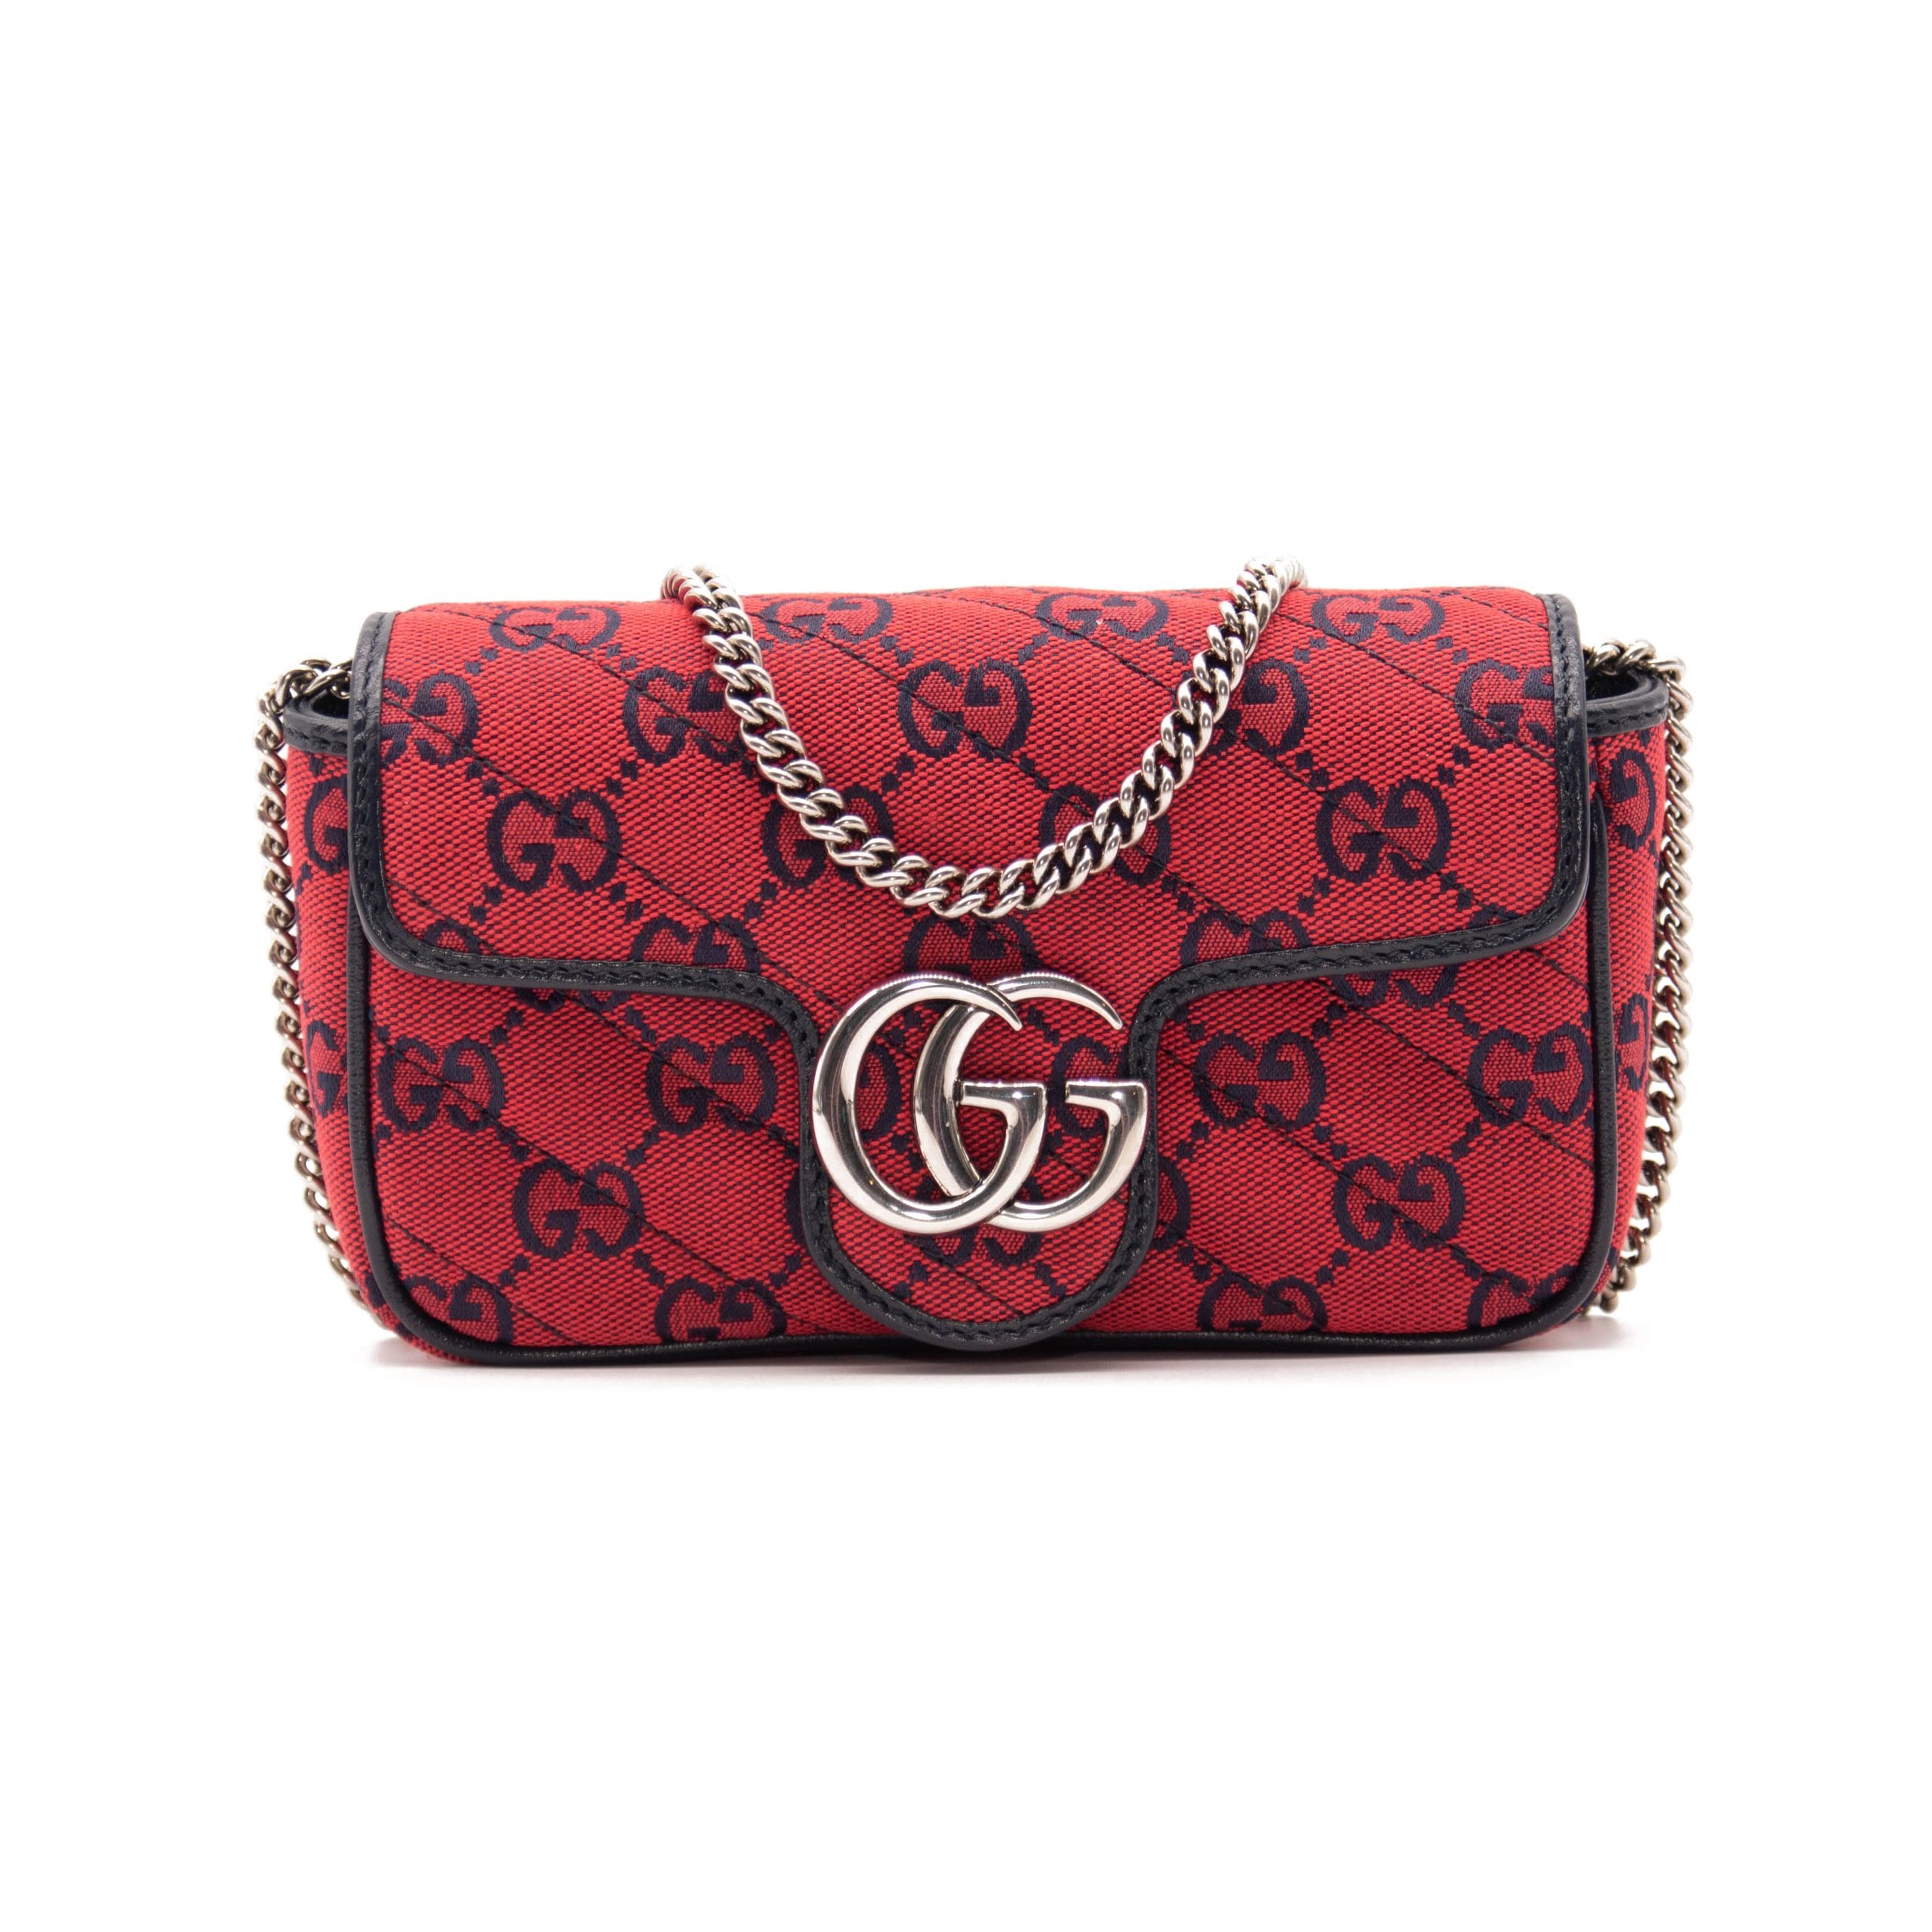 Gucci - GUCCI AUTHENTIC MARMONT GG MATELASSE LEATHER SMALL BAG & RECEIPT &  DUSTBAG on Designer Wardrobe